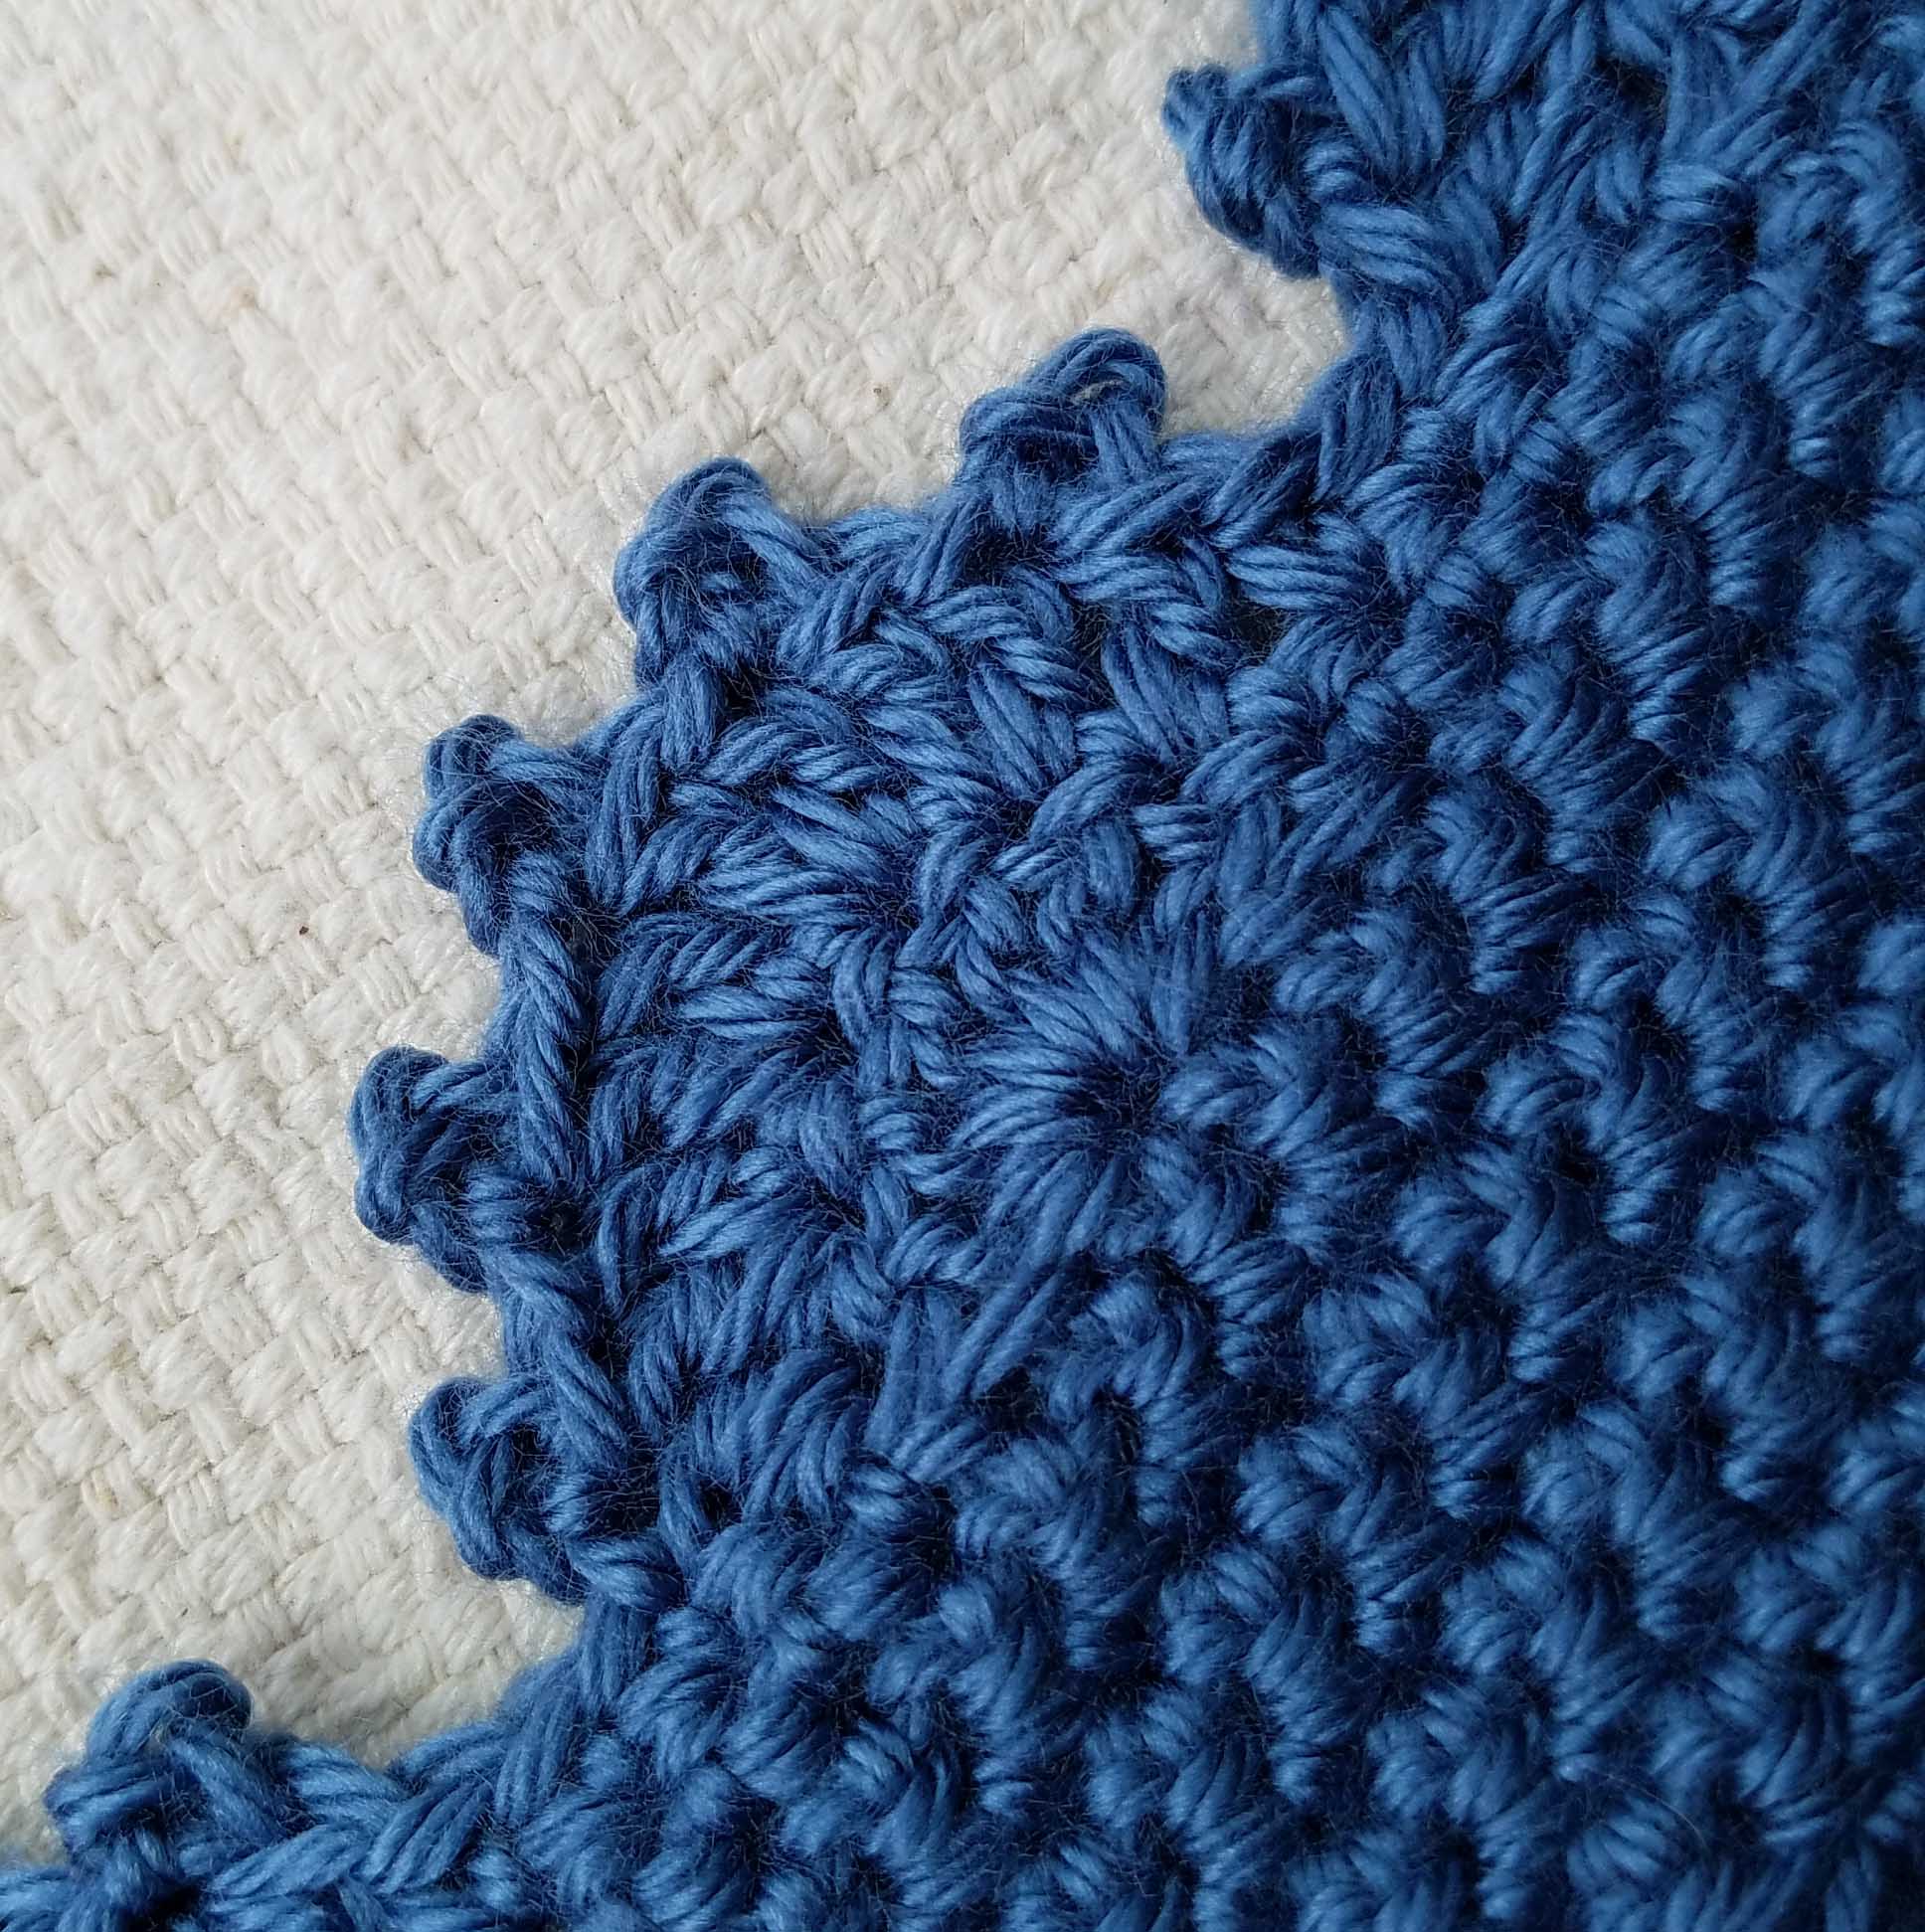 How to Crochet the Picot Stitch